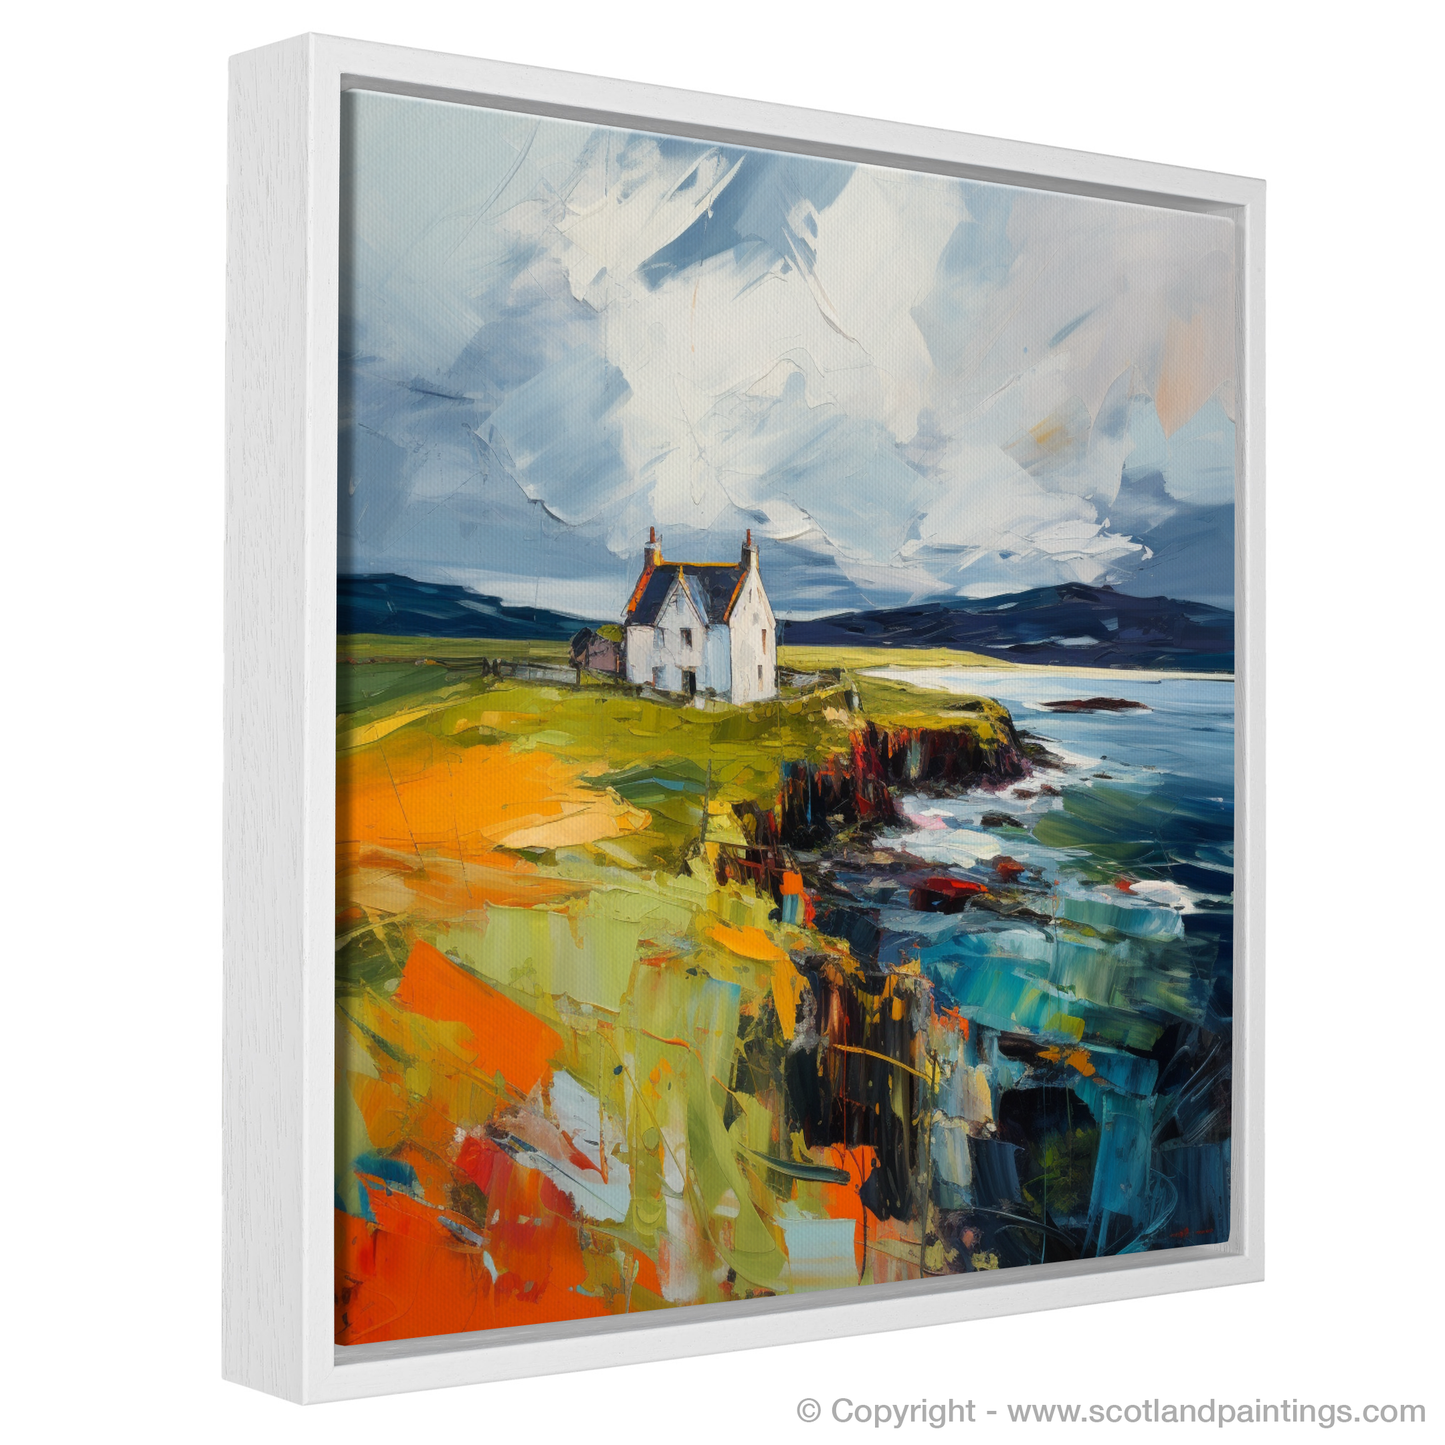 Painting and Art Print of Orkney, North of mainland Scotland entitled "Orkney Unleashed: An Expressionist Ode to Rugged Beauty".